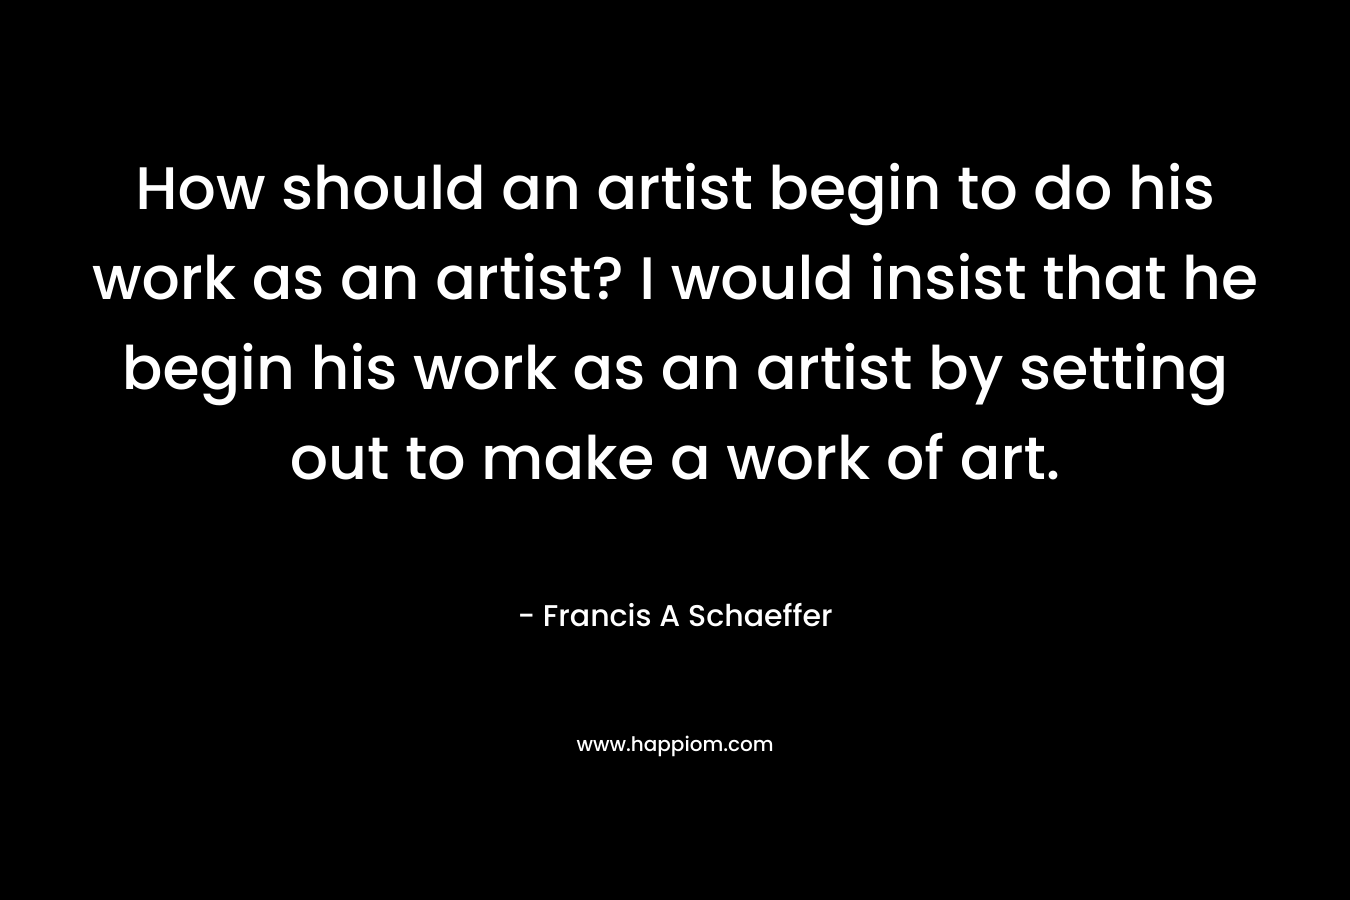 How should an artist begin to do his work as an artist? I would insist that he begin his work as an artist by setting out to make a work of art. – Francis A Schaeffer